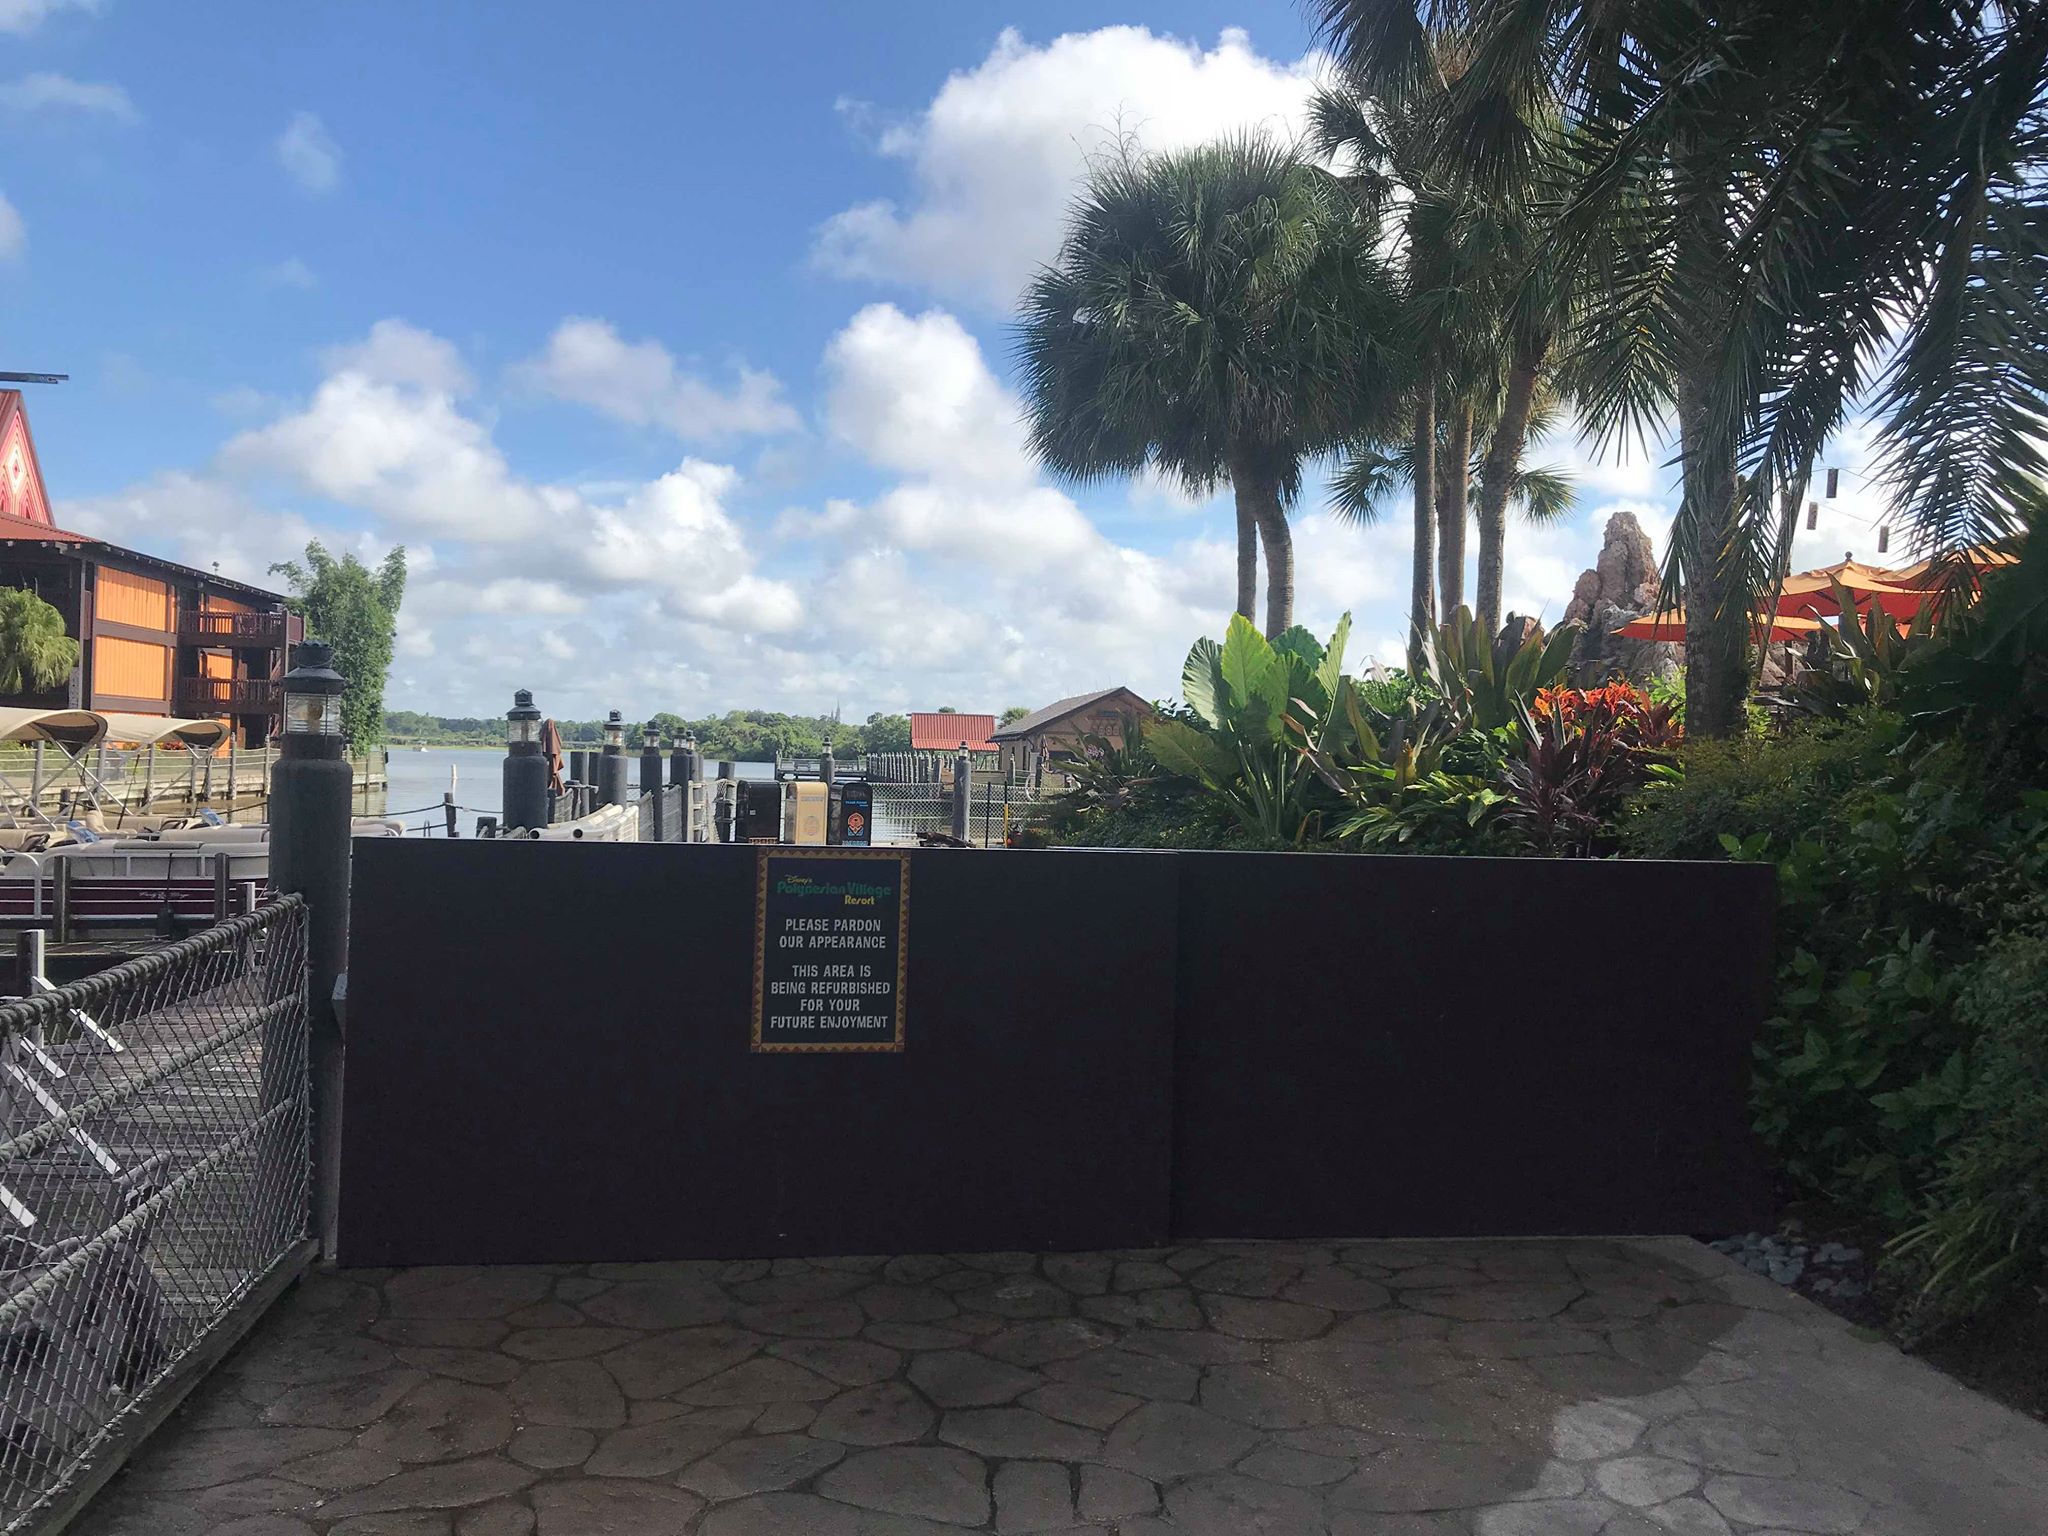 Construction Underway on the Grounds at Disney’s Polynesian Village Resort